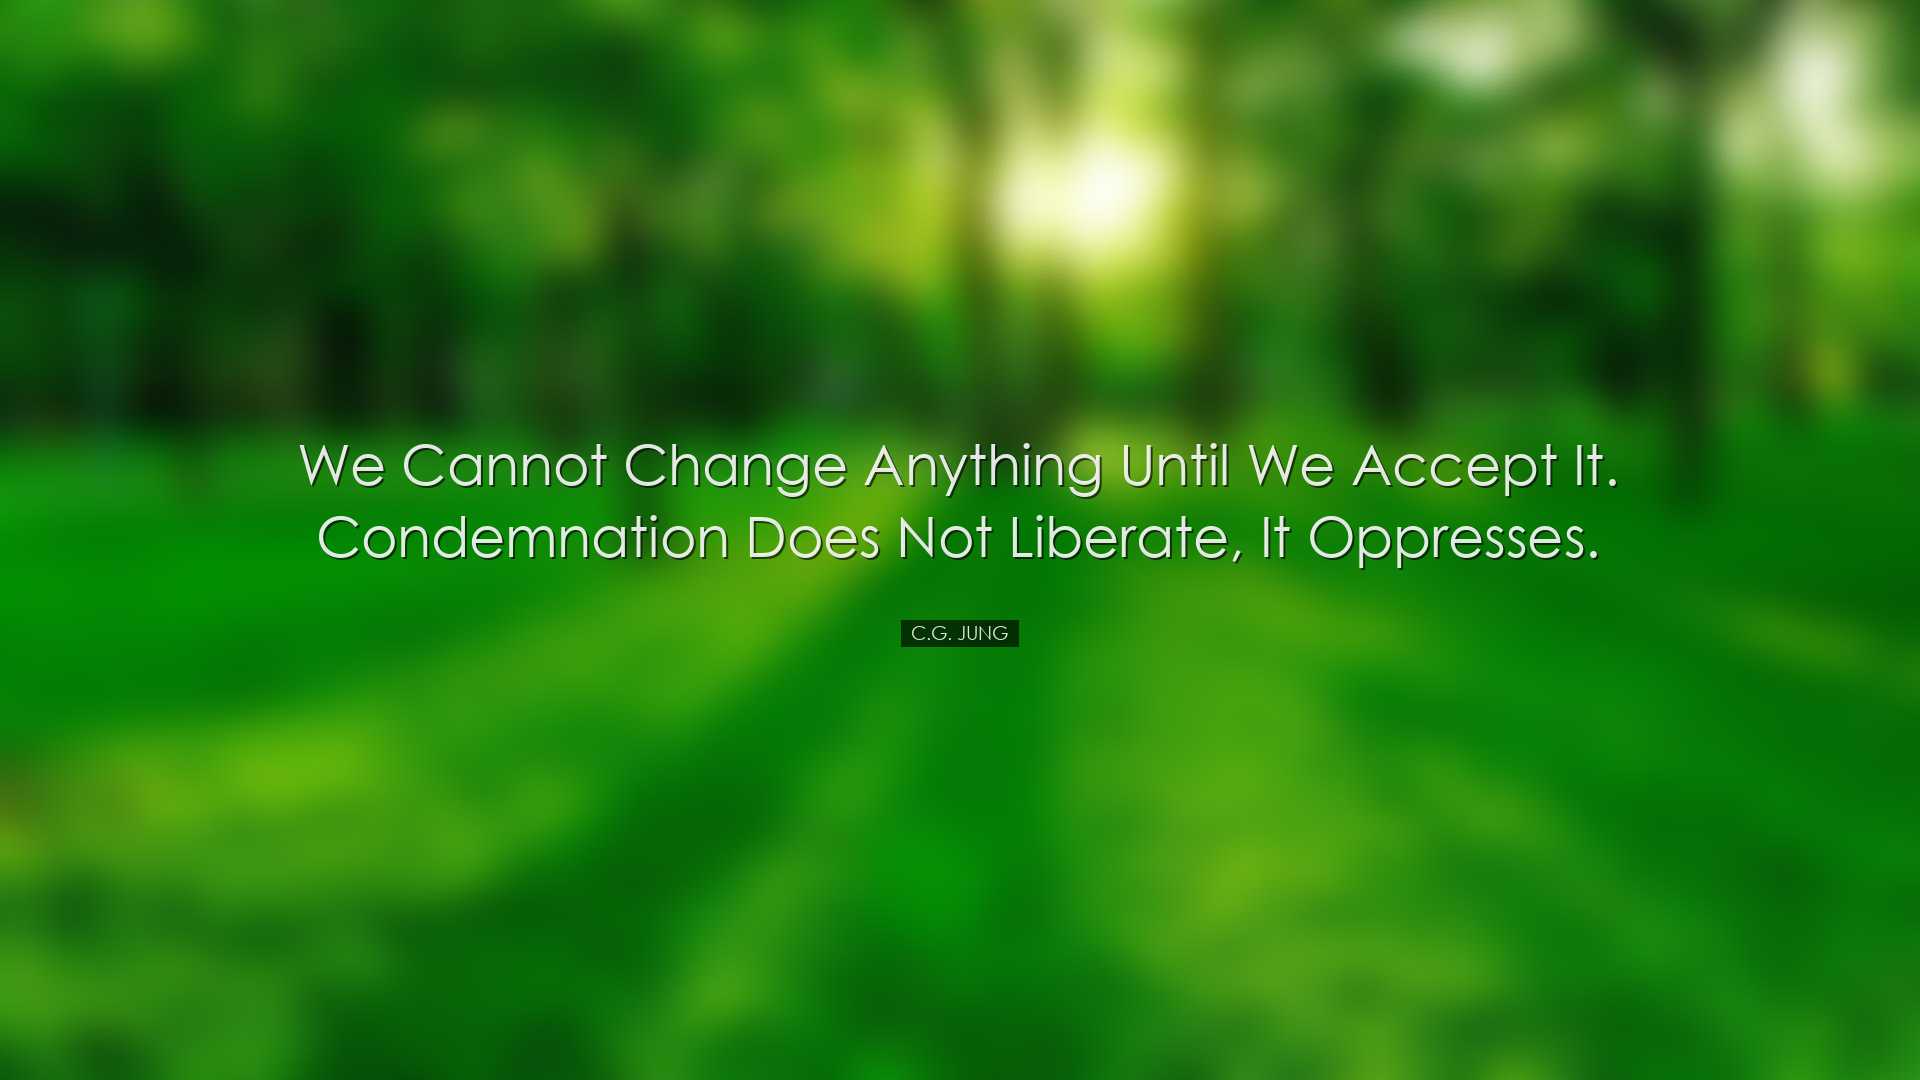 We cannot change anything until we accept it. Condemnation does no